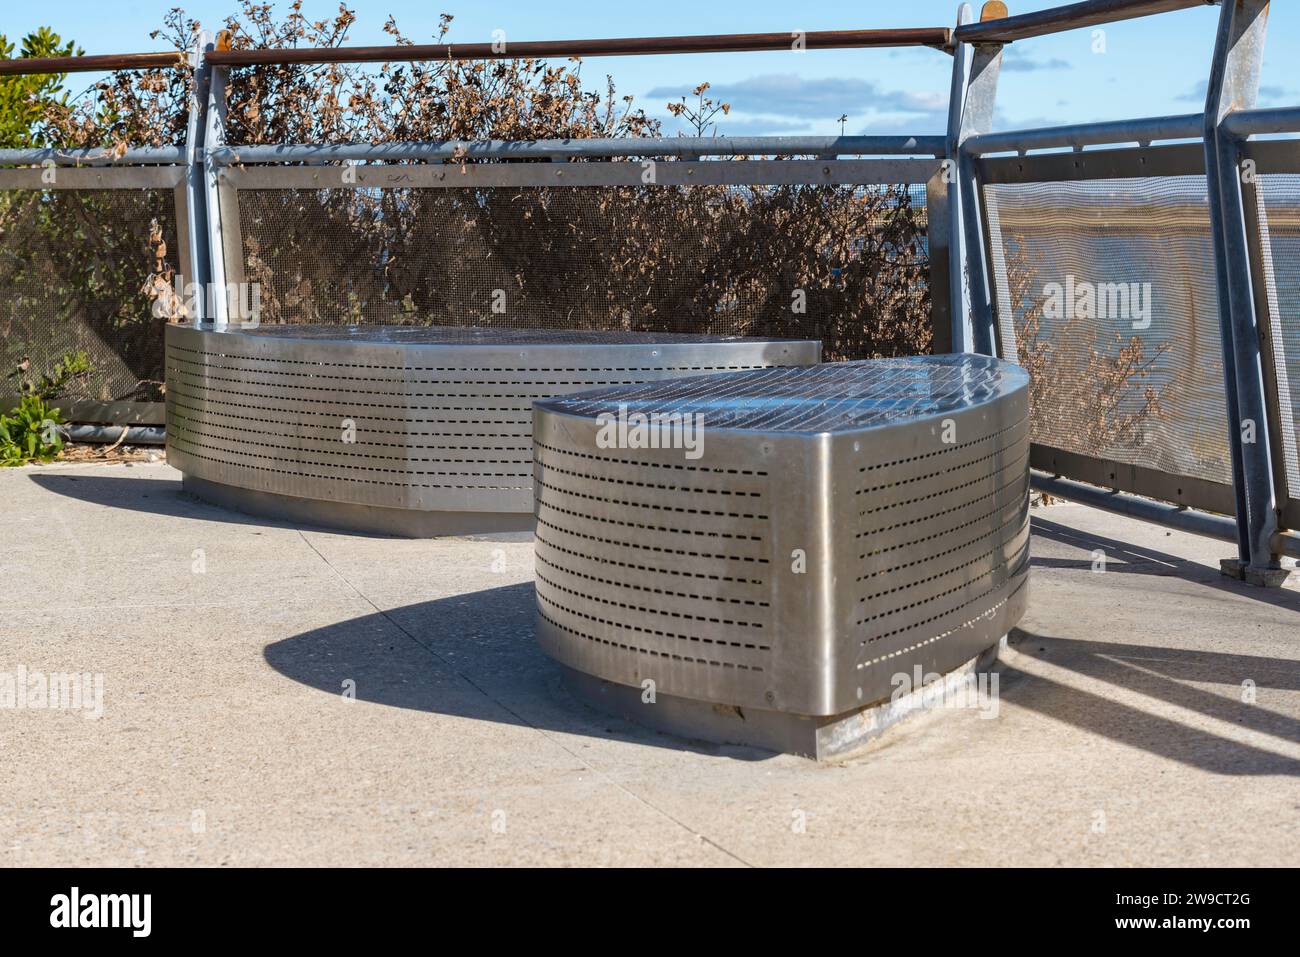 Stainless steel seating and viewpoint fencing installed as part of a major port and shoreline renovation at Port Botany Sydney, Australia in 2020 Stock Photo